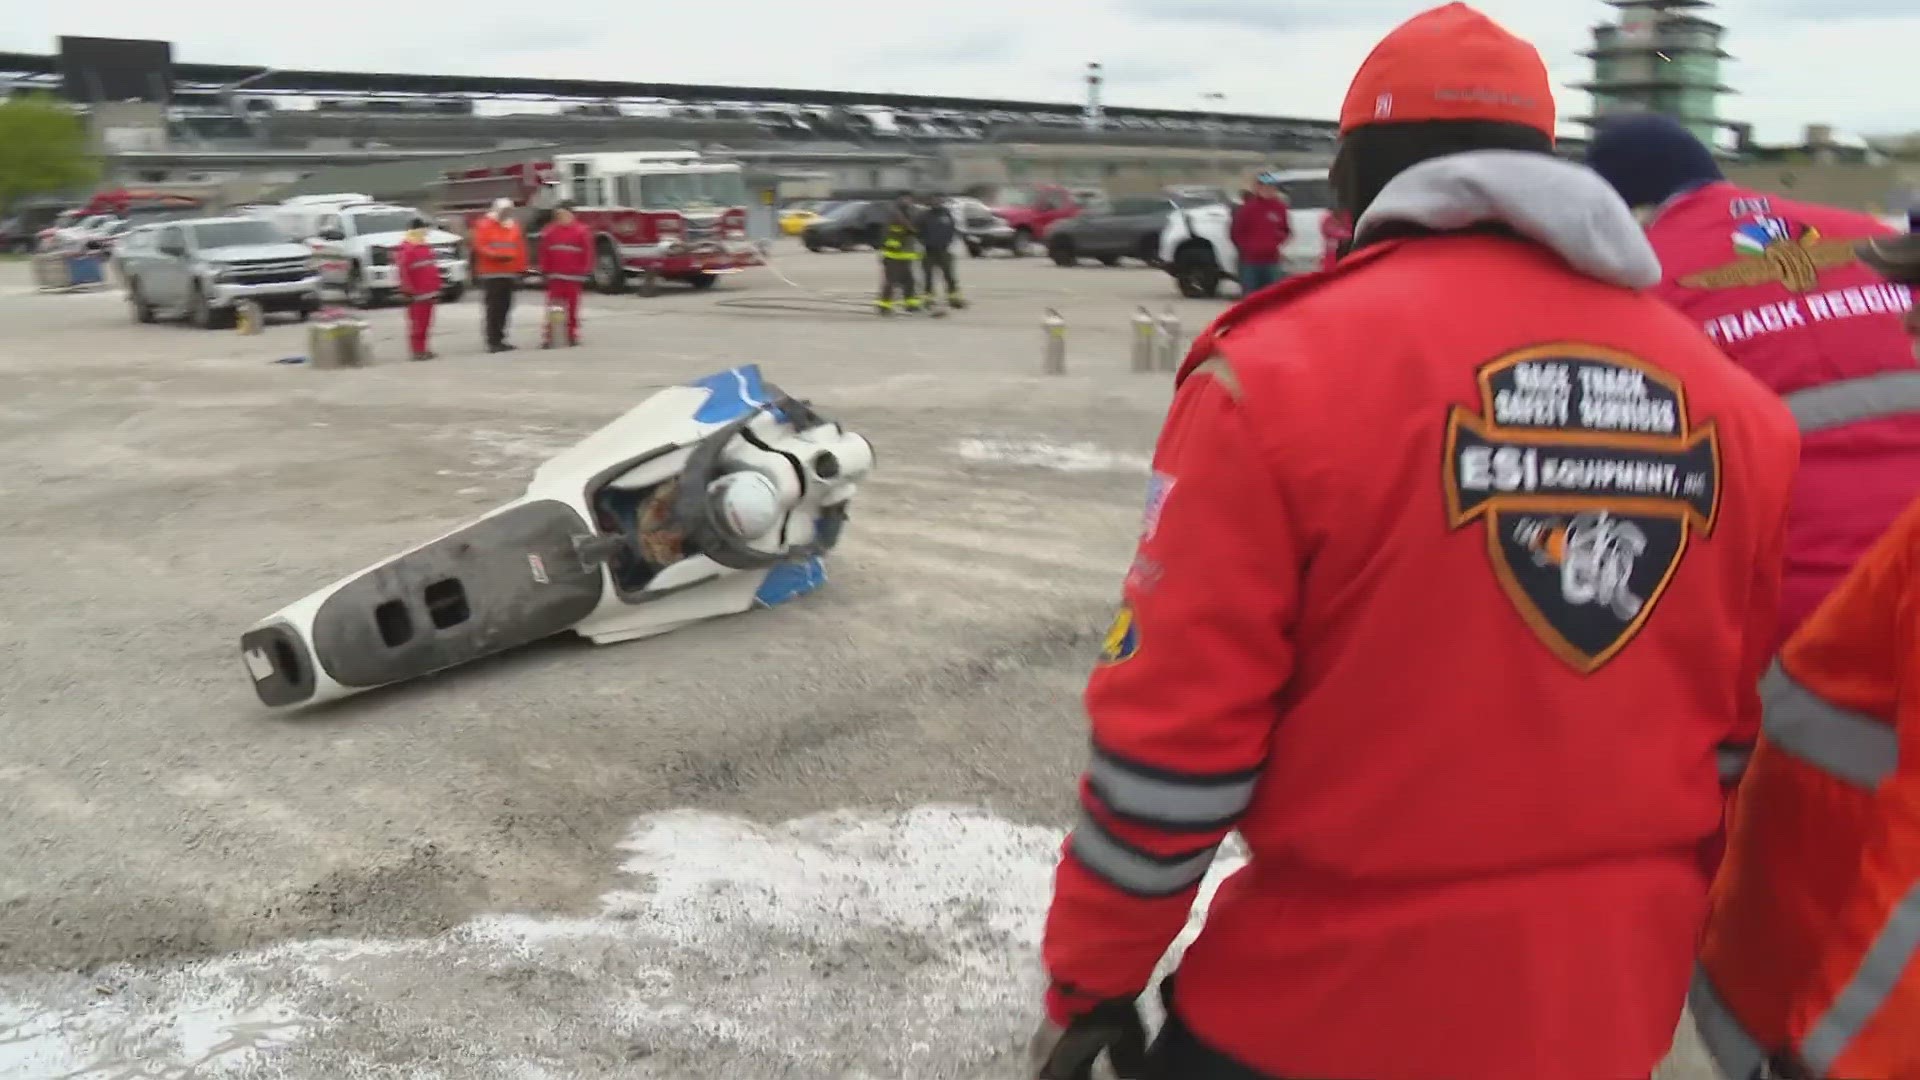 "It's quite the undertaking," said IndyCar's senior director of track safety & medical.